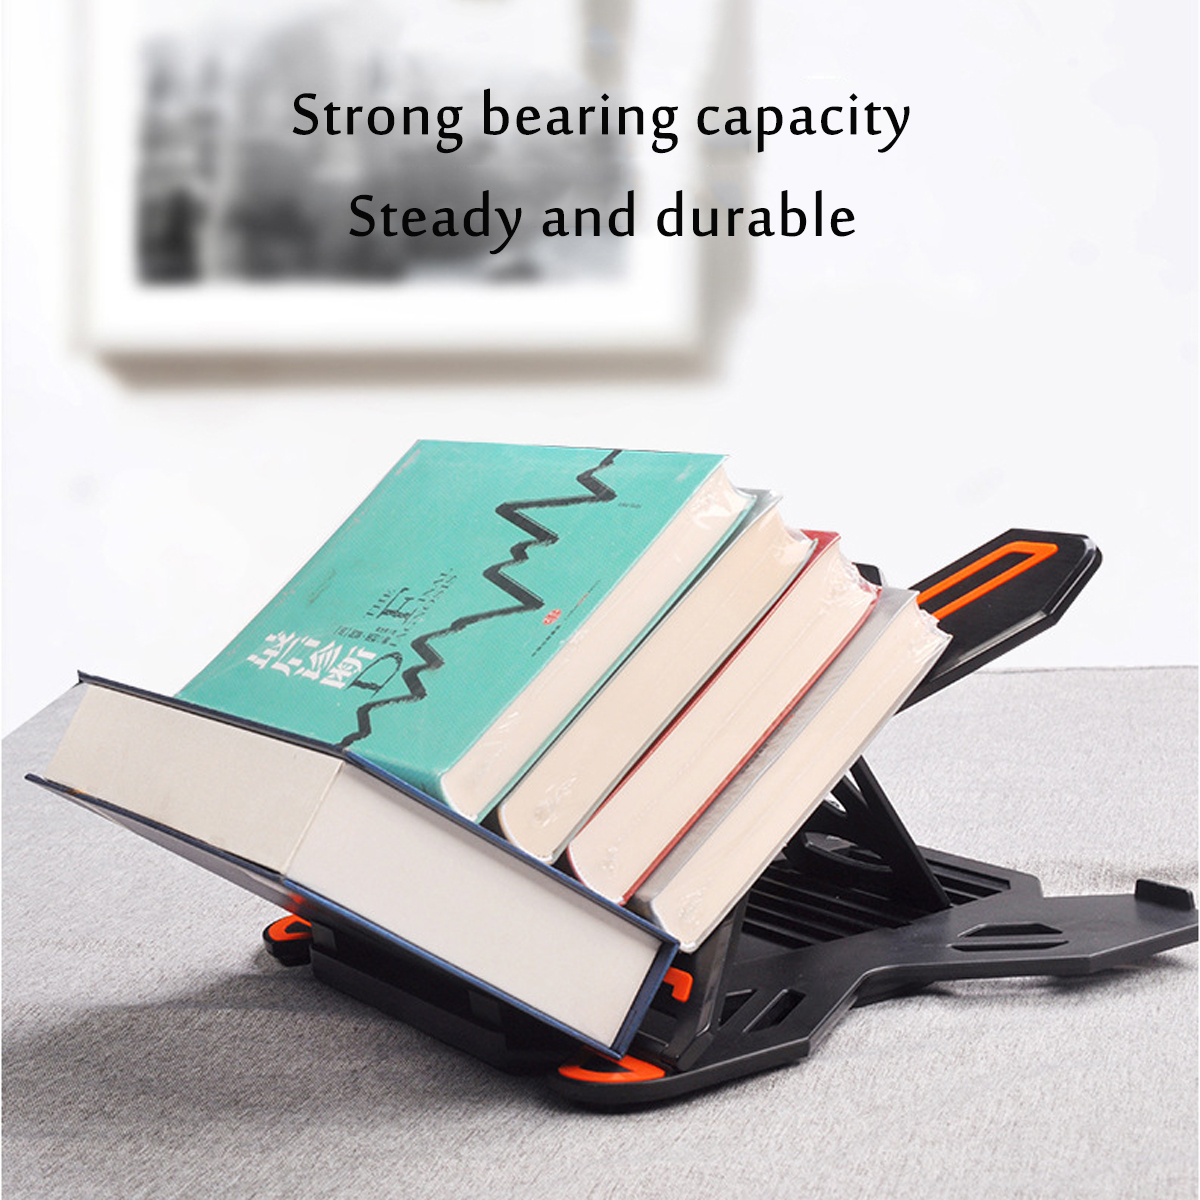 2-in-1-Foldable-Rotatable-Adjustable-Macbook-Stand-Holder-Cooler-with-Phone-Stand-1779286-8